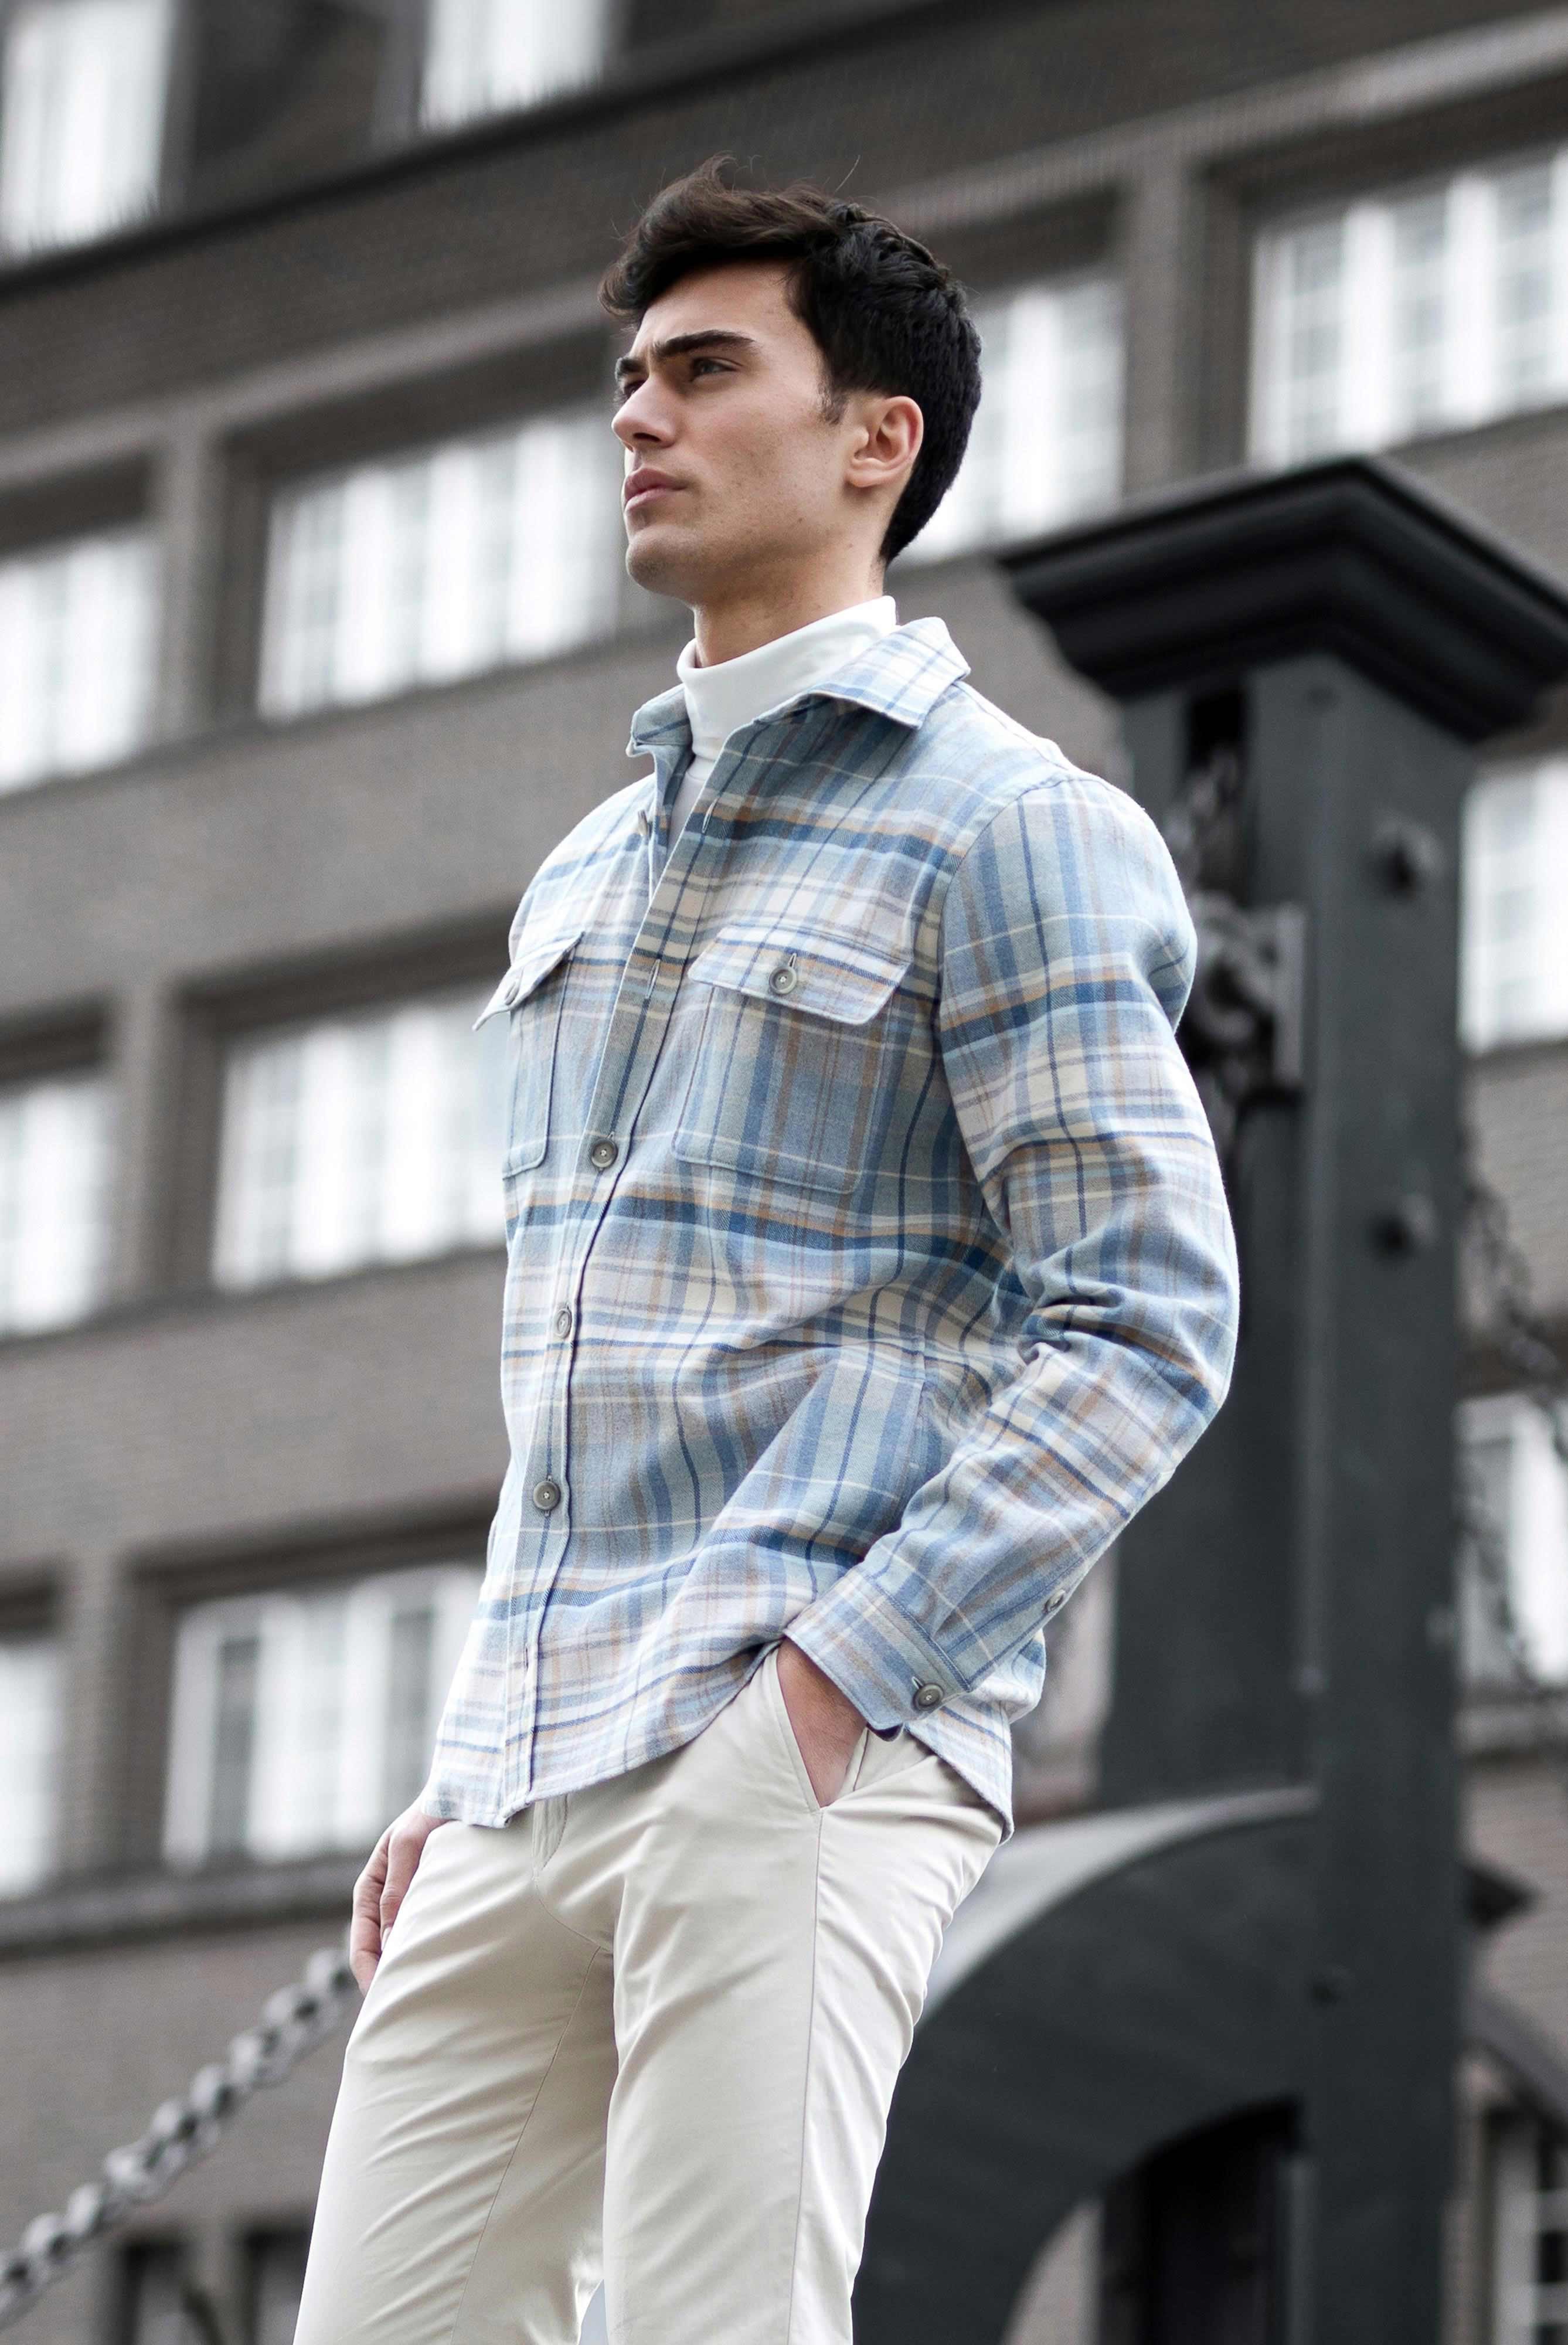 Casual Shirts+Checked Flanell Overshirt+20.2014.9V.156369.740.S